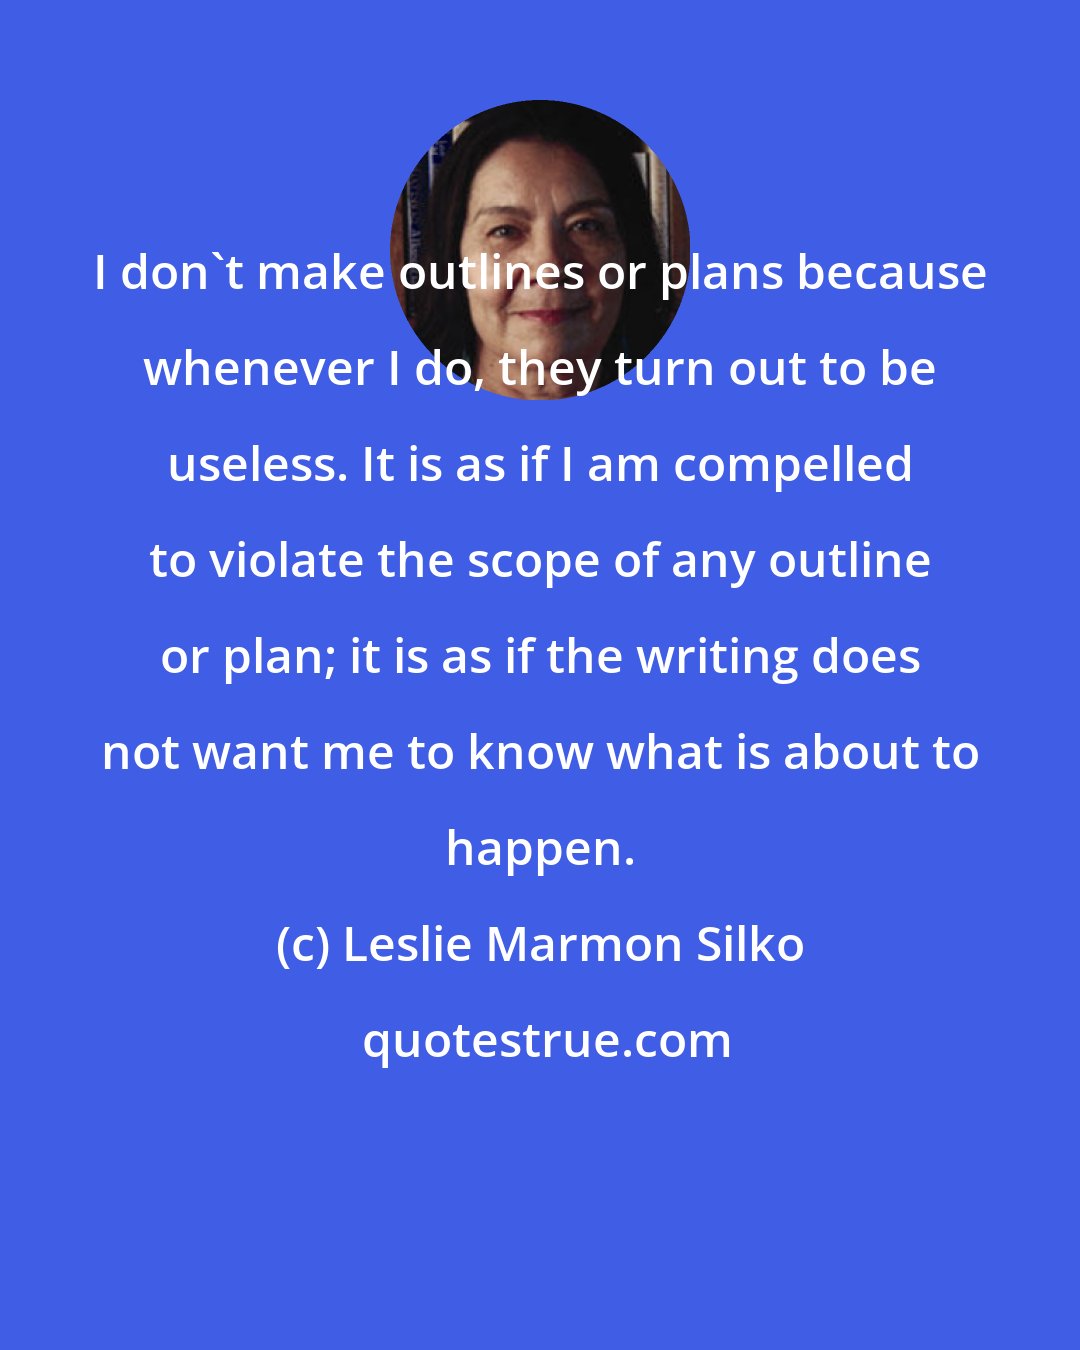 Leslie Marmon Silko: I don't make outlines or plans because whenever I do, they turn out to be useless. It is as if I am compelled to violate the scope of any outline or plan; it is as if the writing does not want me to know what is about to happen.